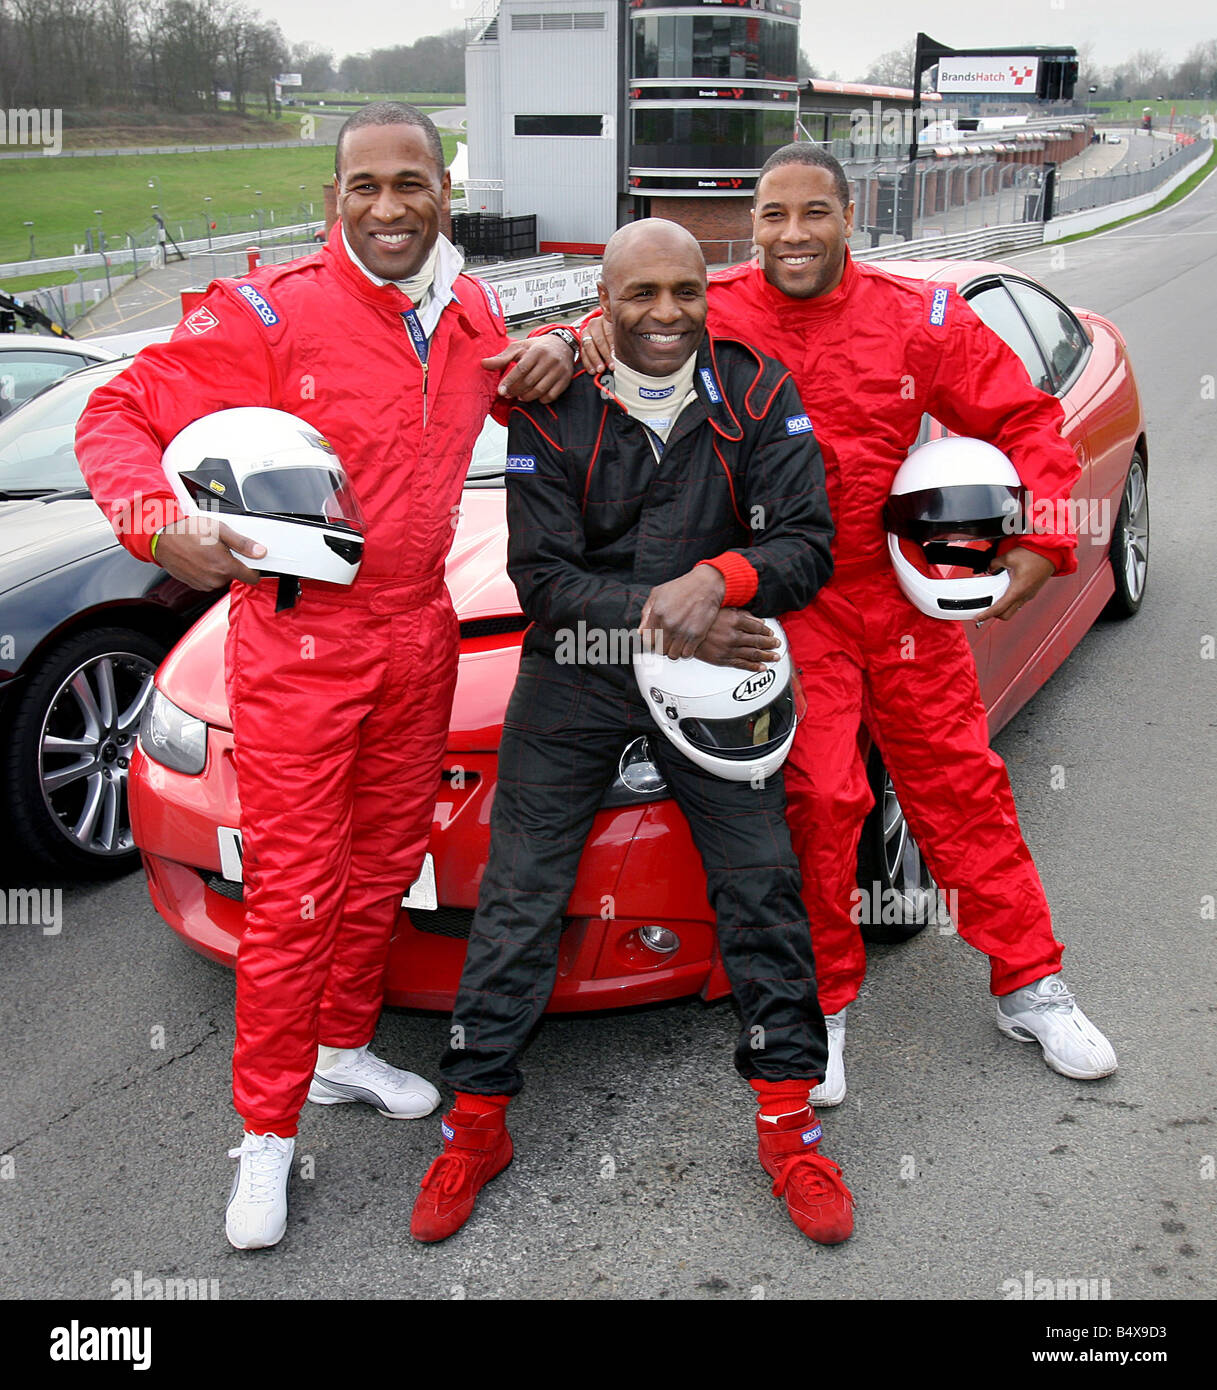 29.1.07: Drivers, including ex footballers, try out for the first Caribbeen Racing Team at Brands Hatch today. Les Ferdinand, Luther Blissett and John Barnes.;Mike Moore Stock Photo